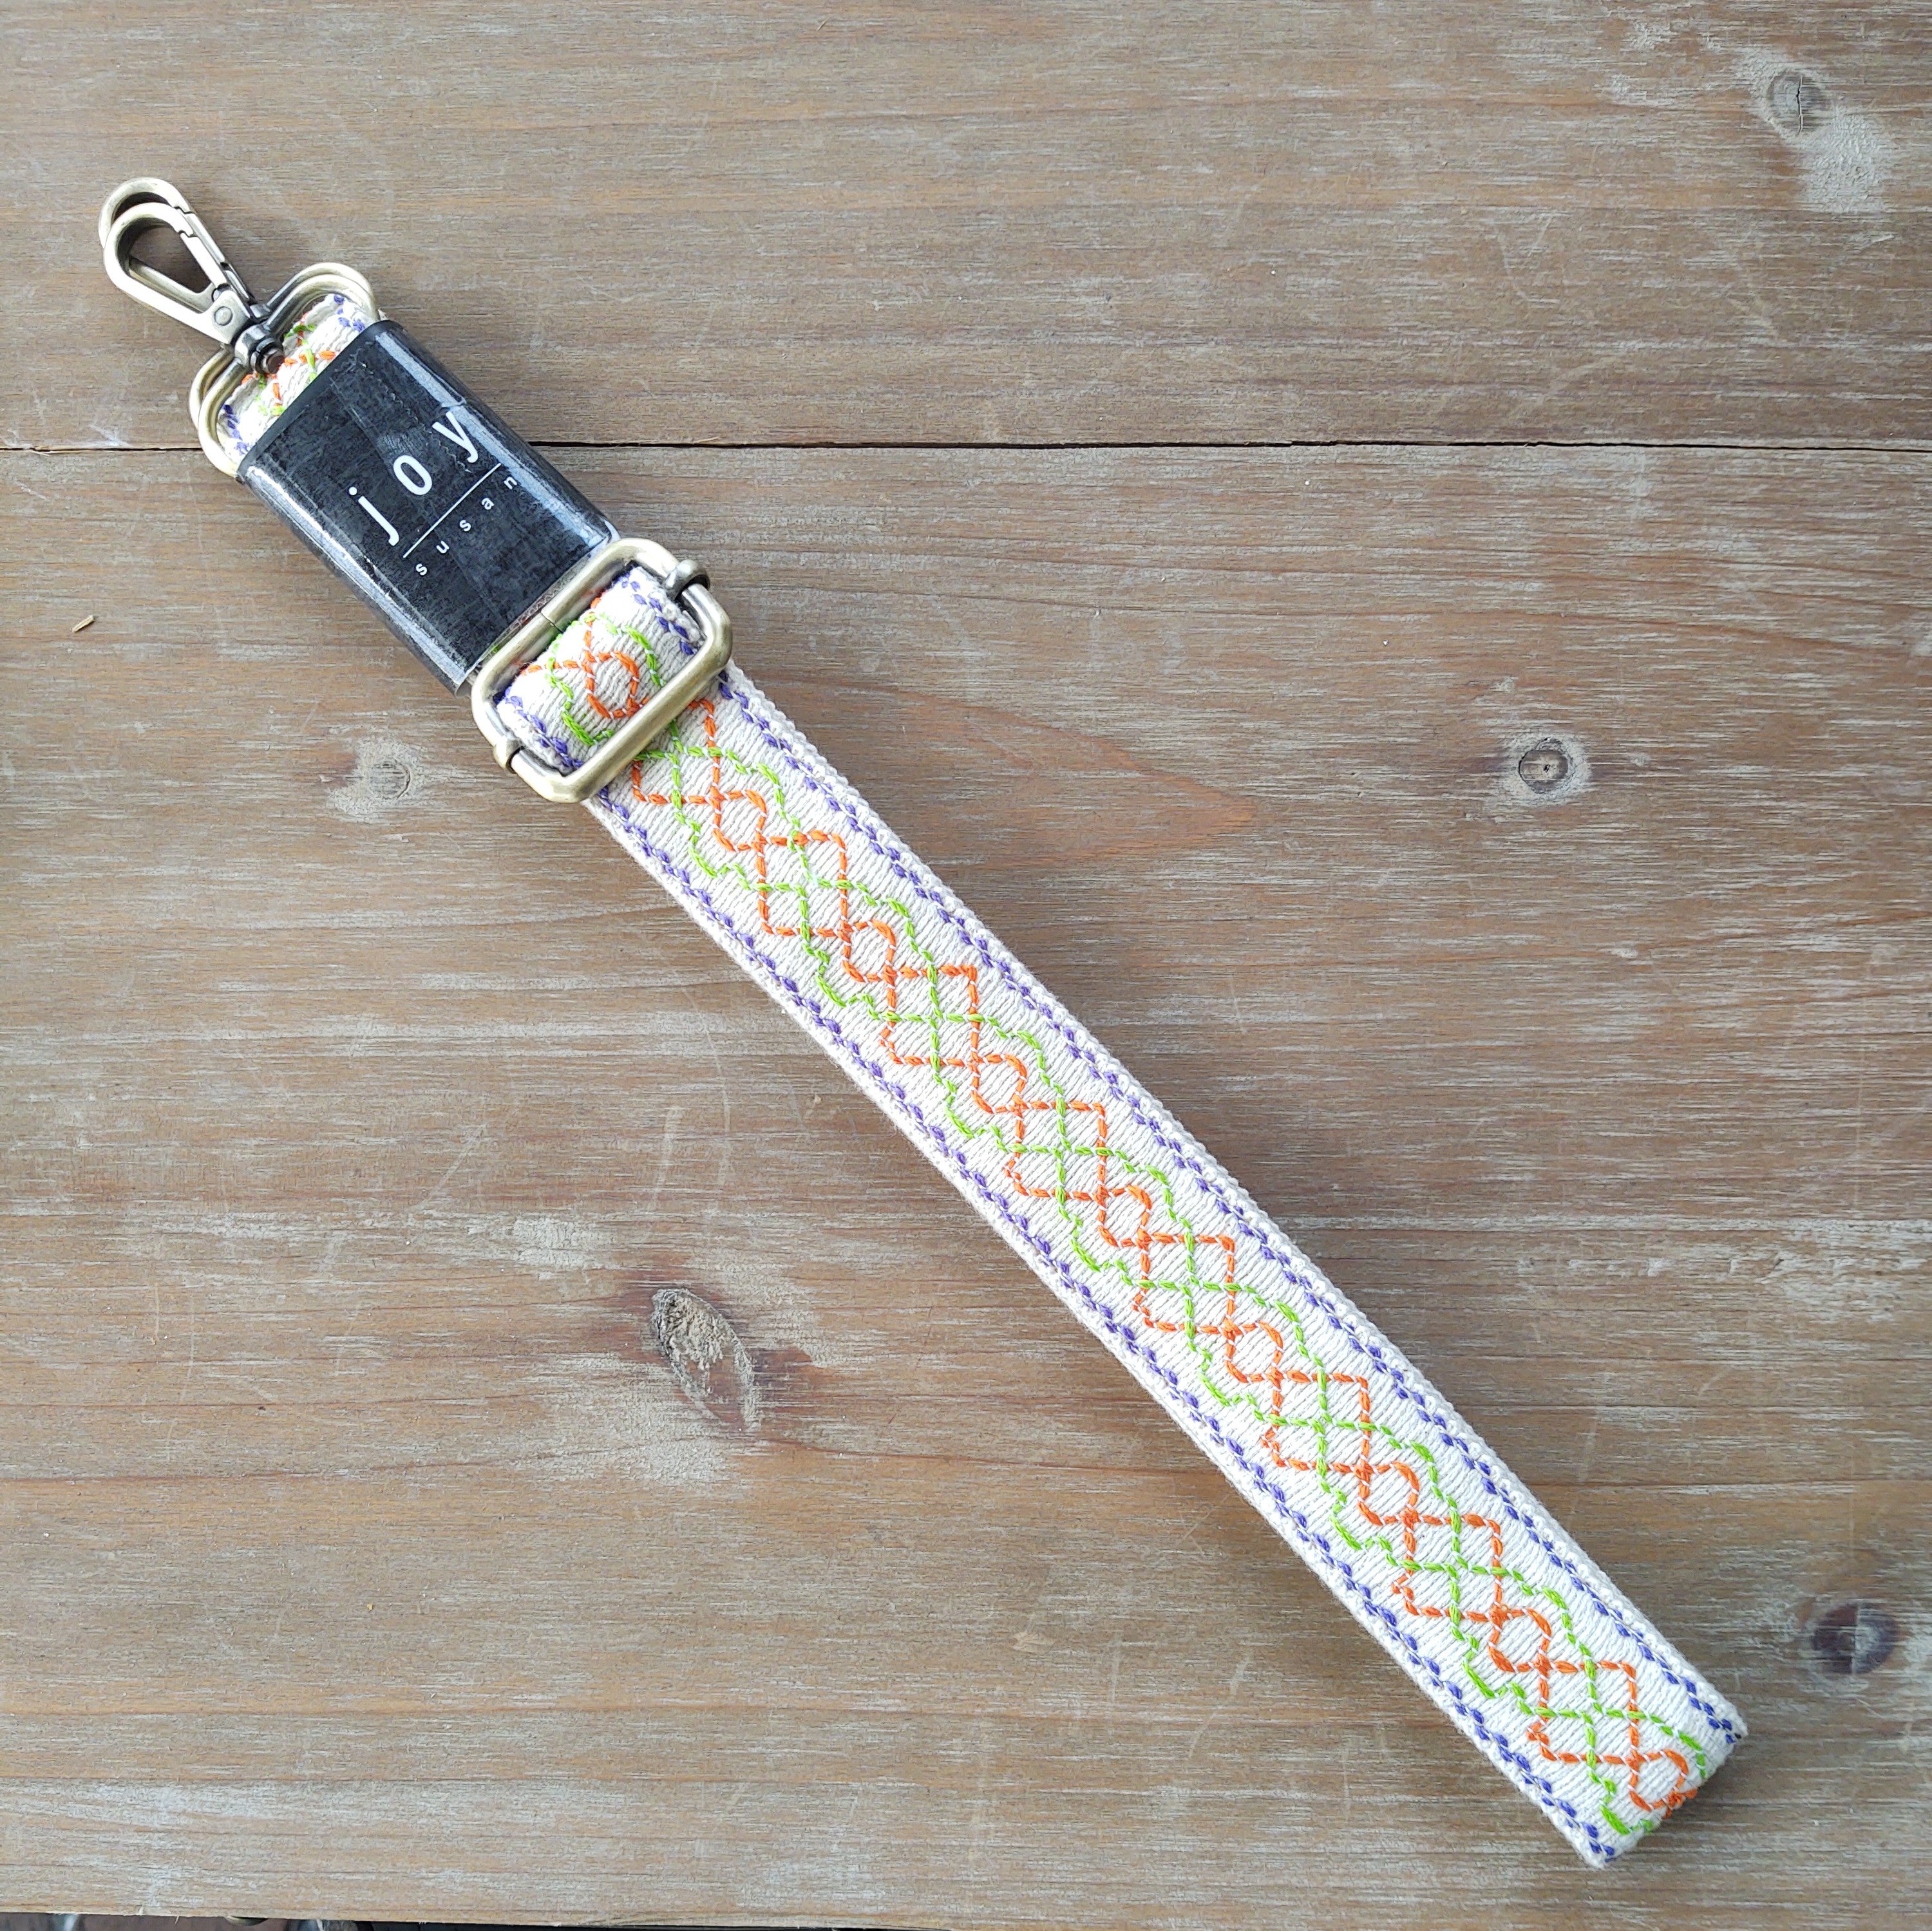 1 Cream/Soft Neons Entwined Guitar Strap – The English Garden